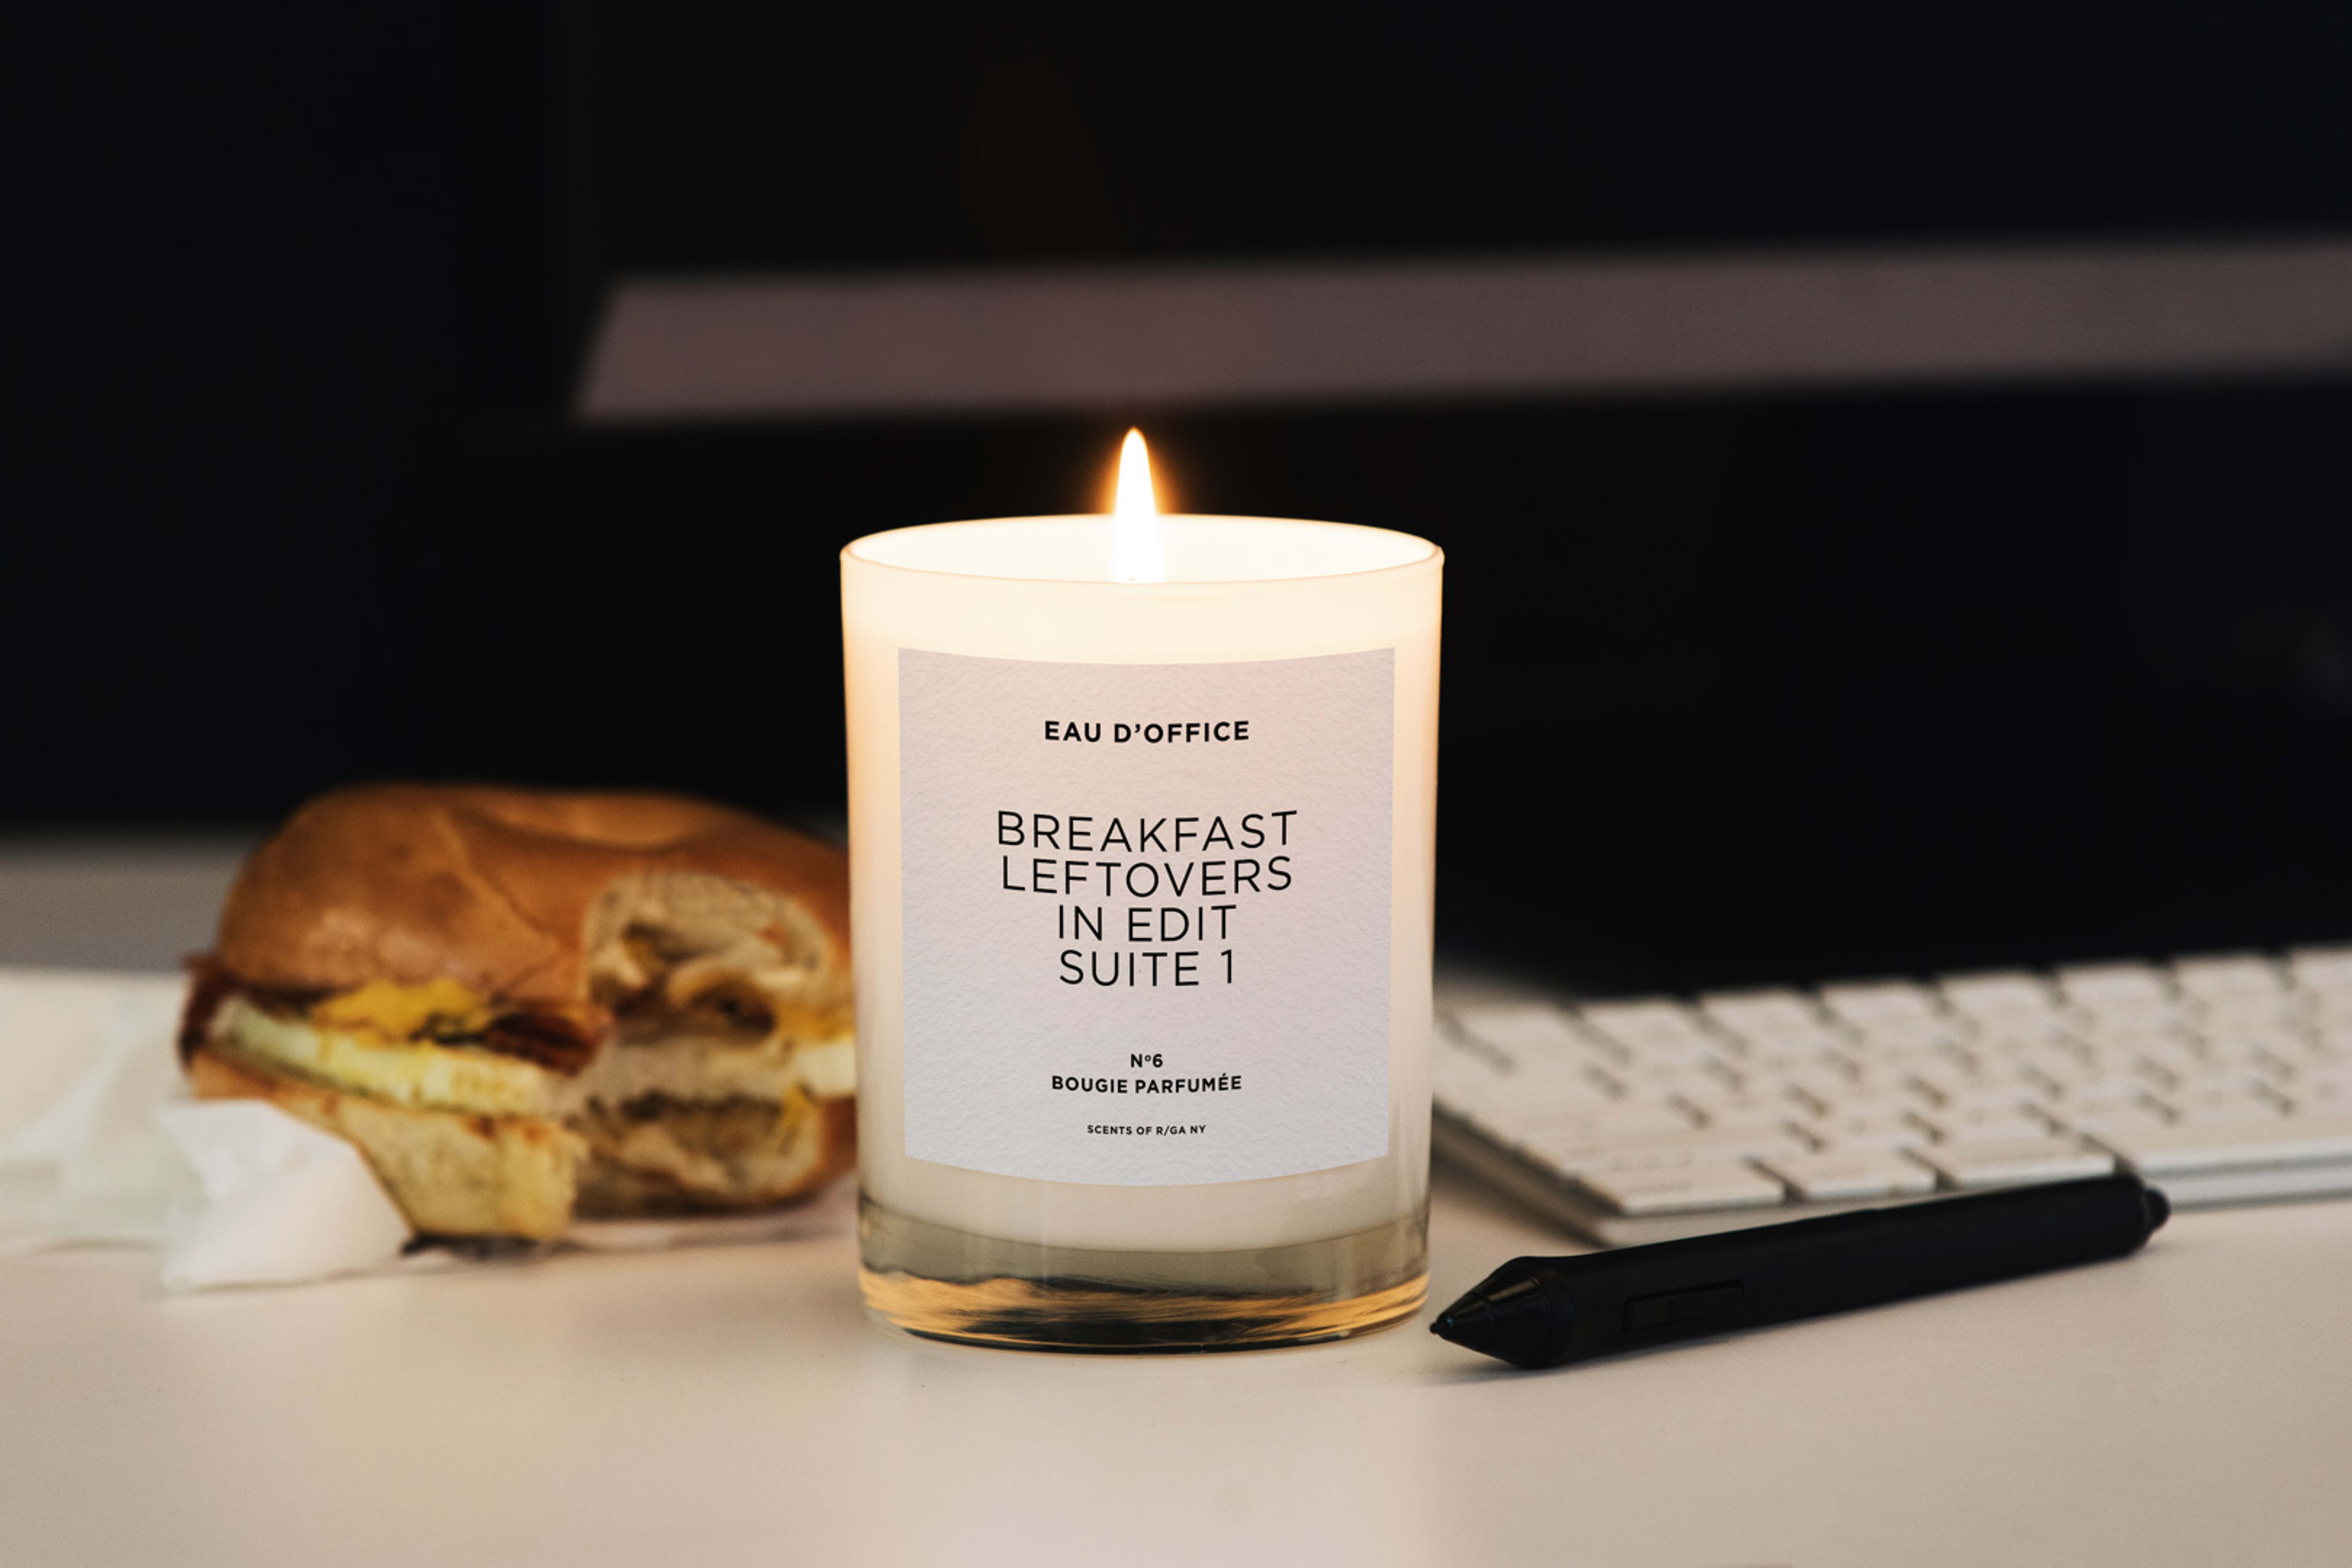 Miss the smell of the office printer? These candles recreate our prepandemic life